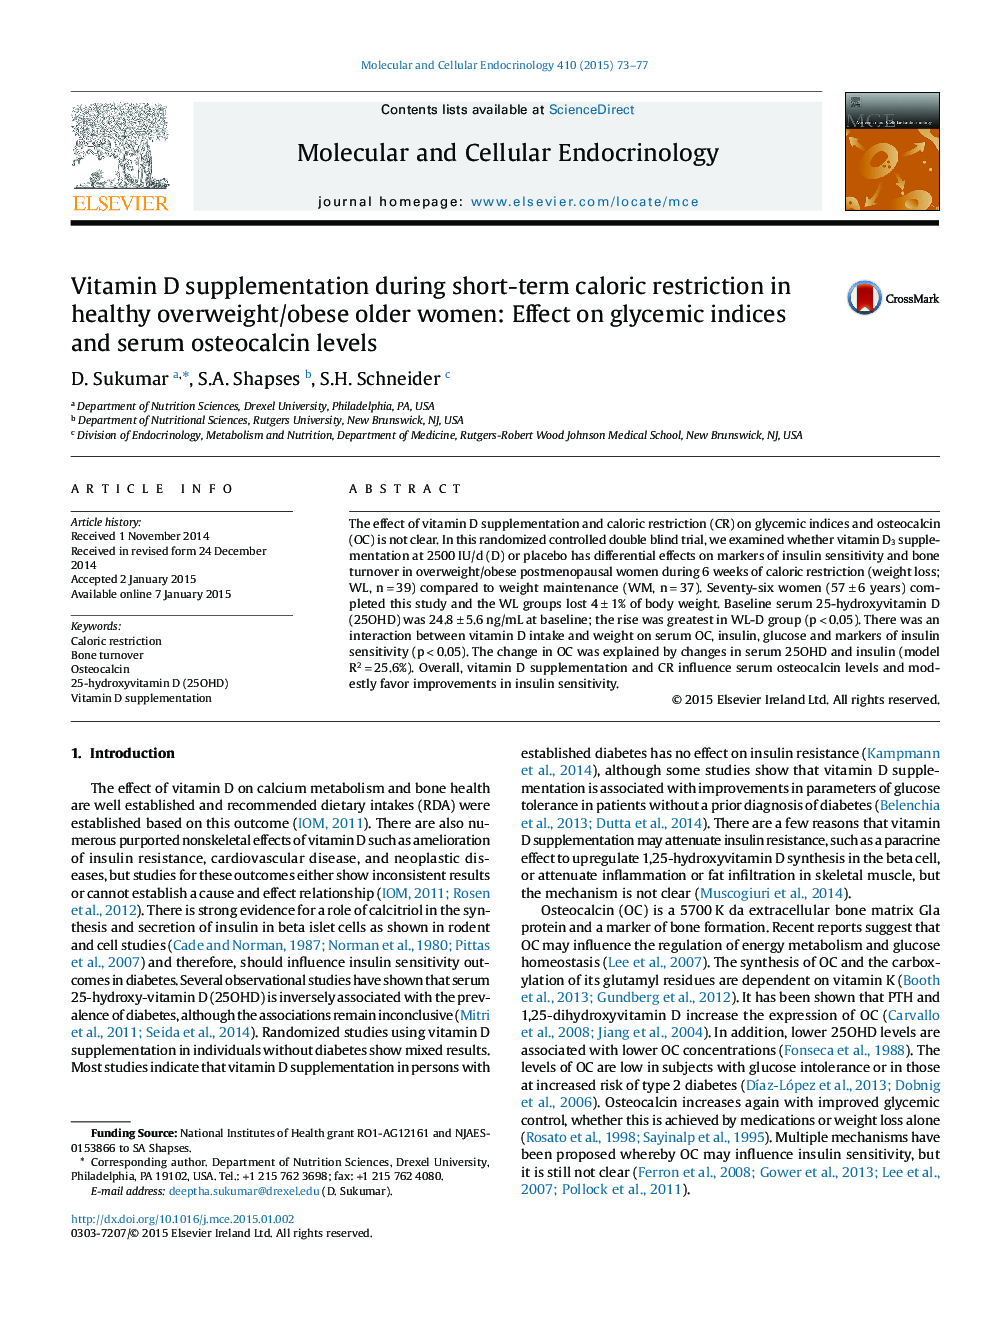 Vitamin D supplementation during short-term caloric restriction in healthy overweight/obese older women: Effect on glycemic indices and serum osteocalcin levels 